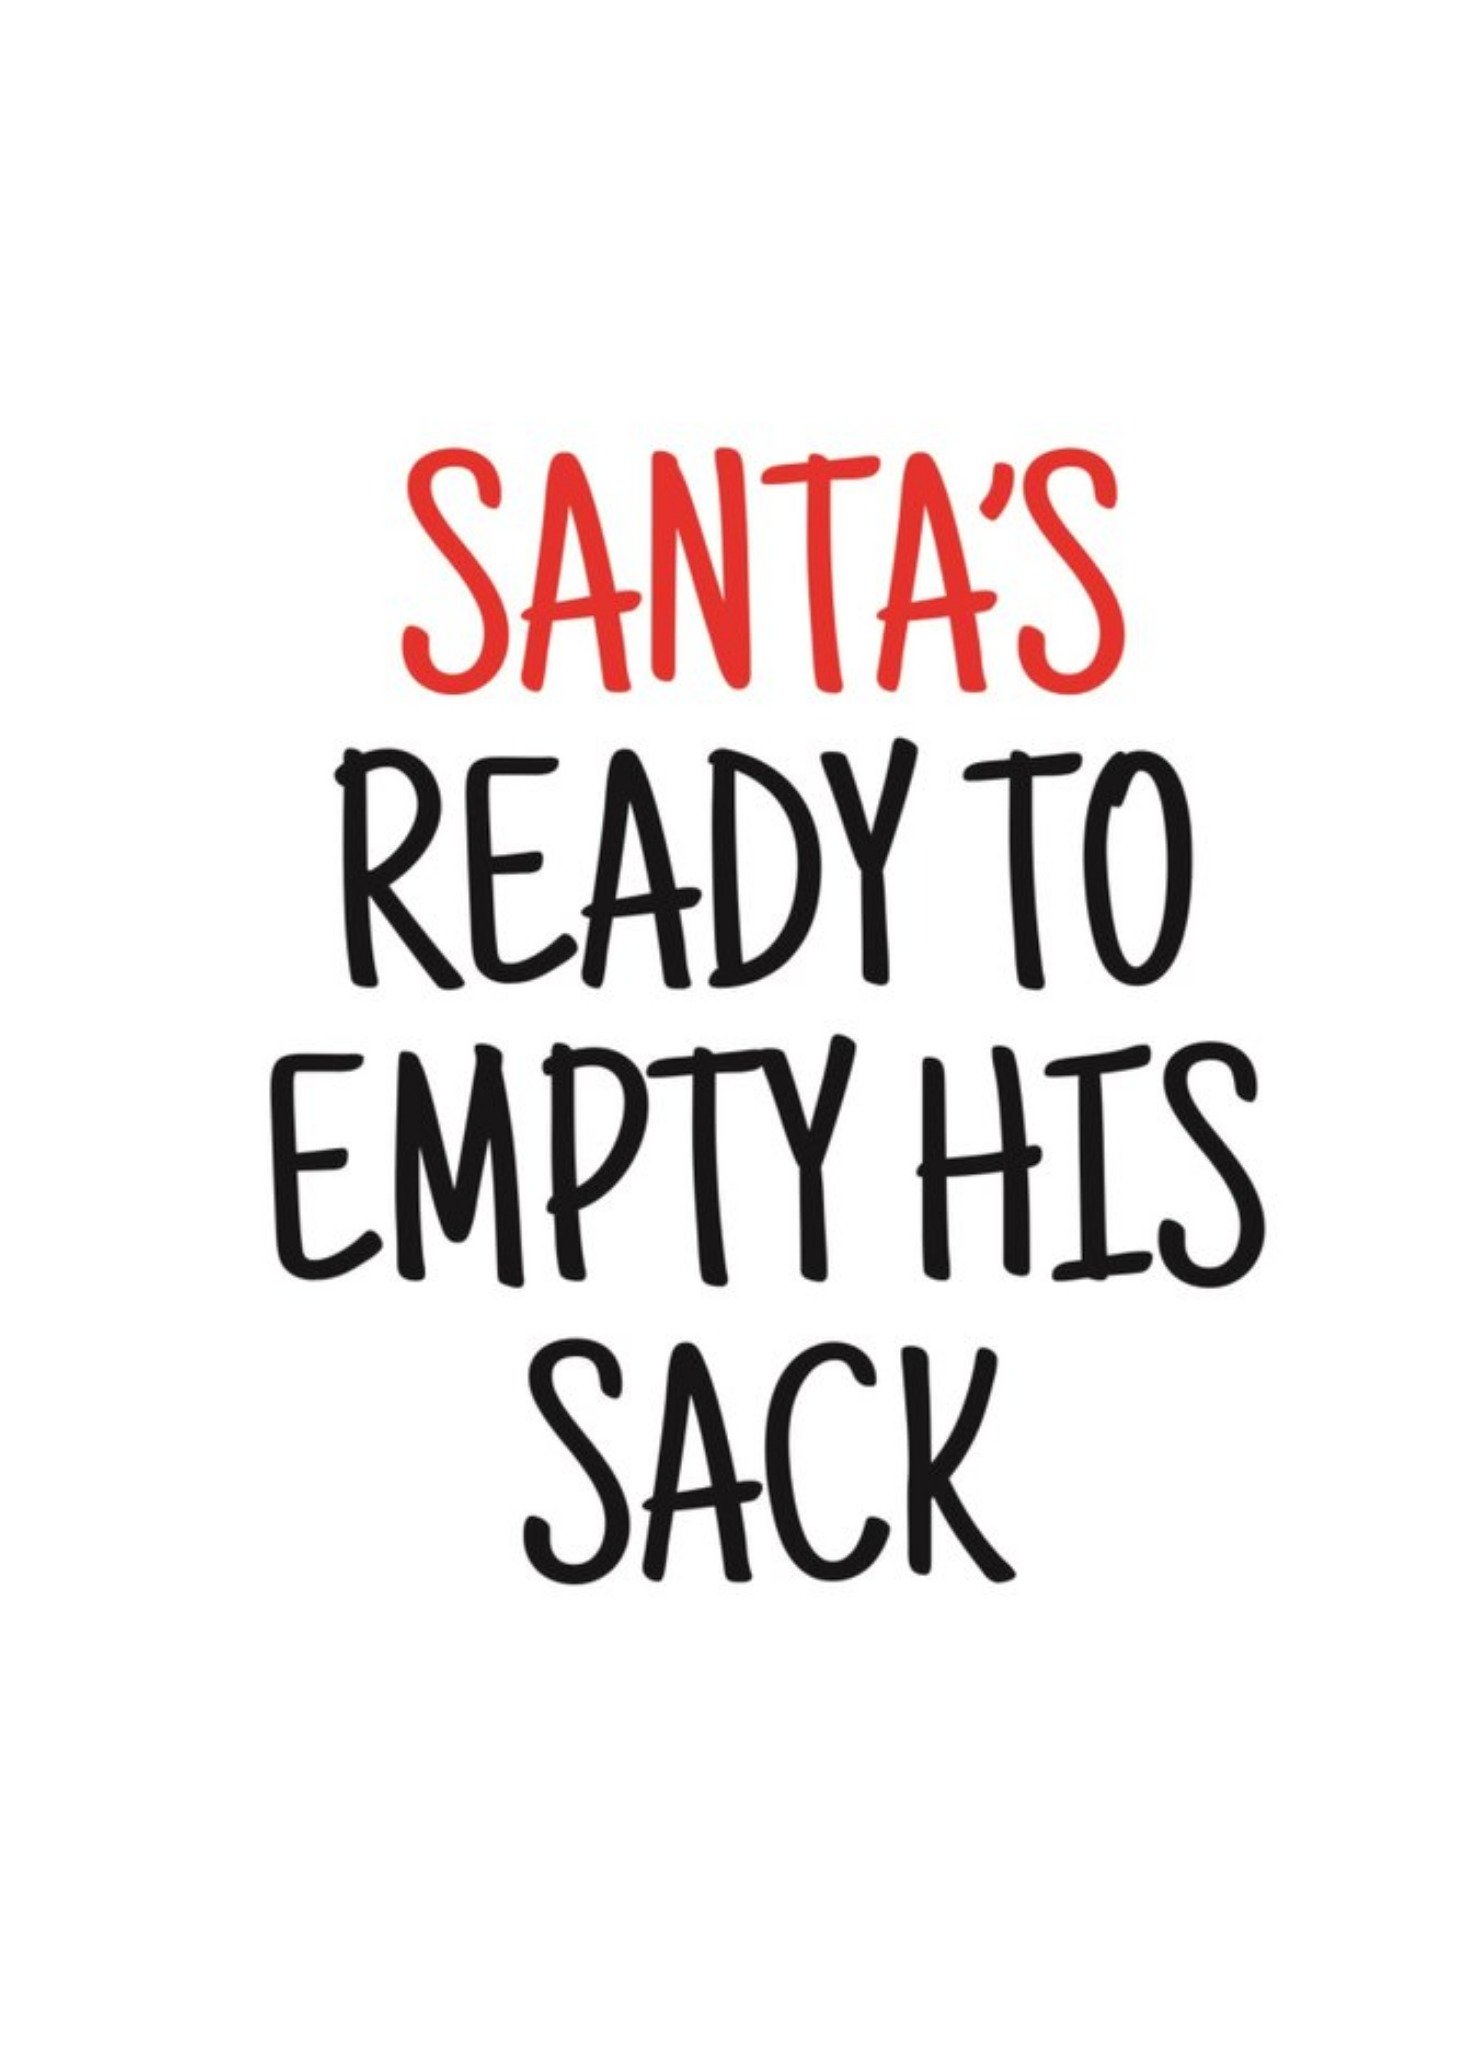 Banter King Typographical Santas Ready To Empty His Sack Card, Large